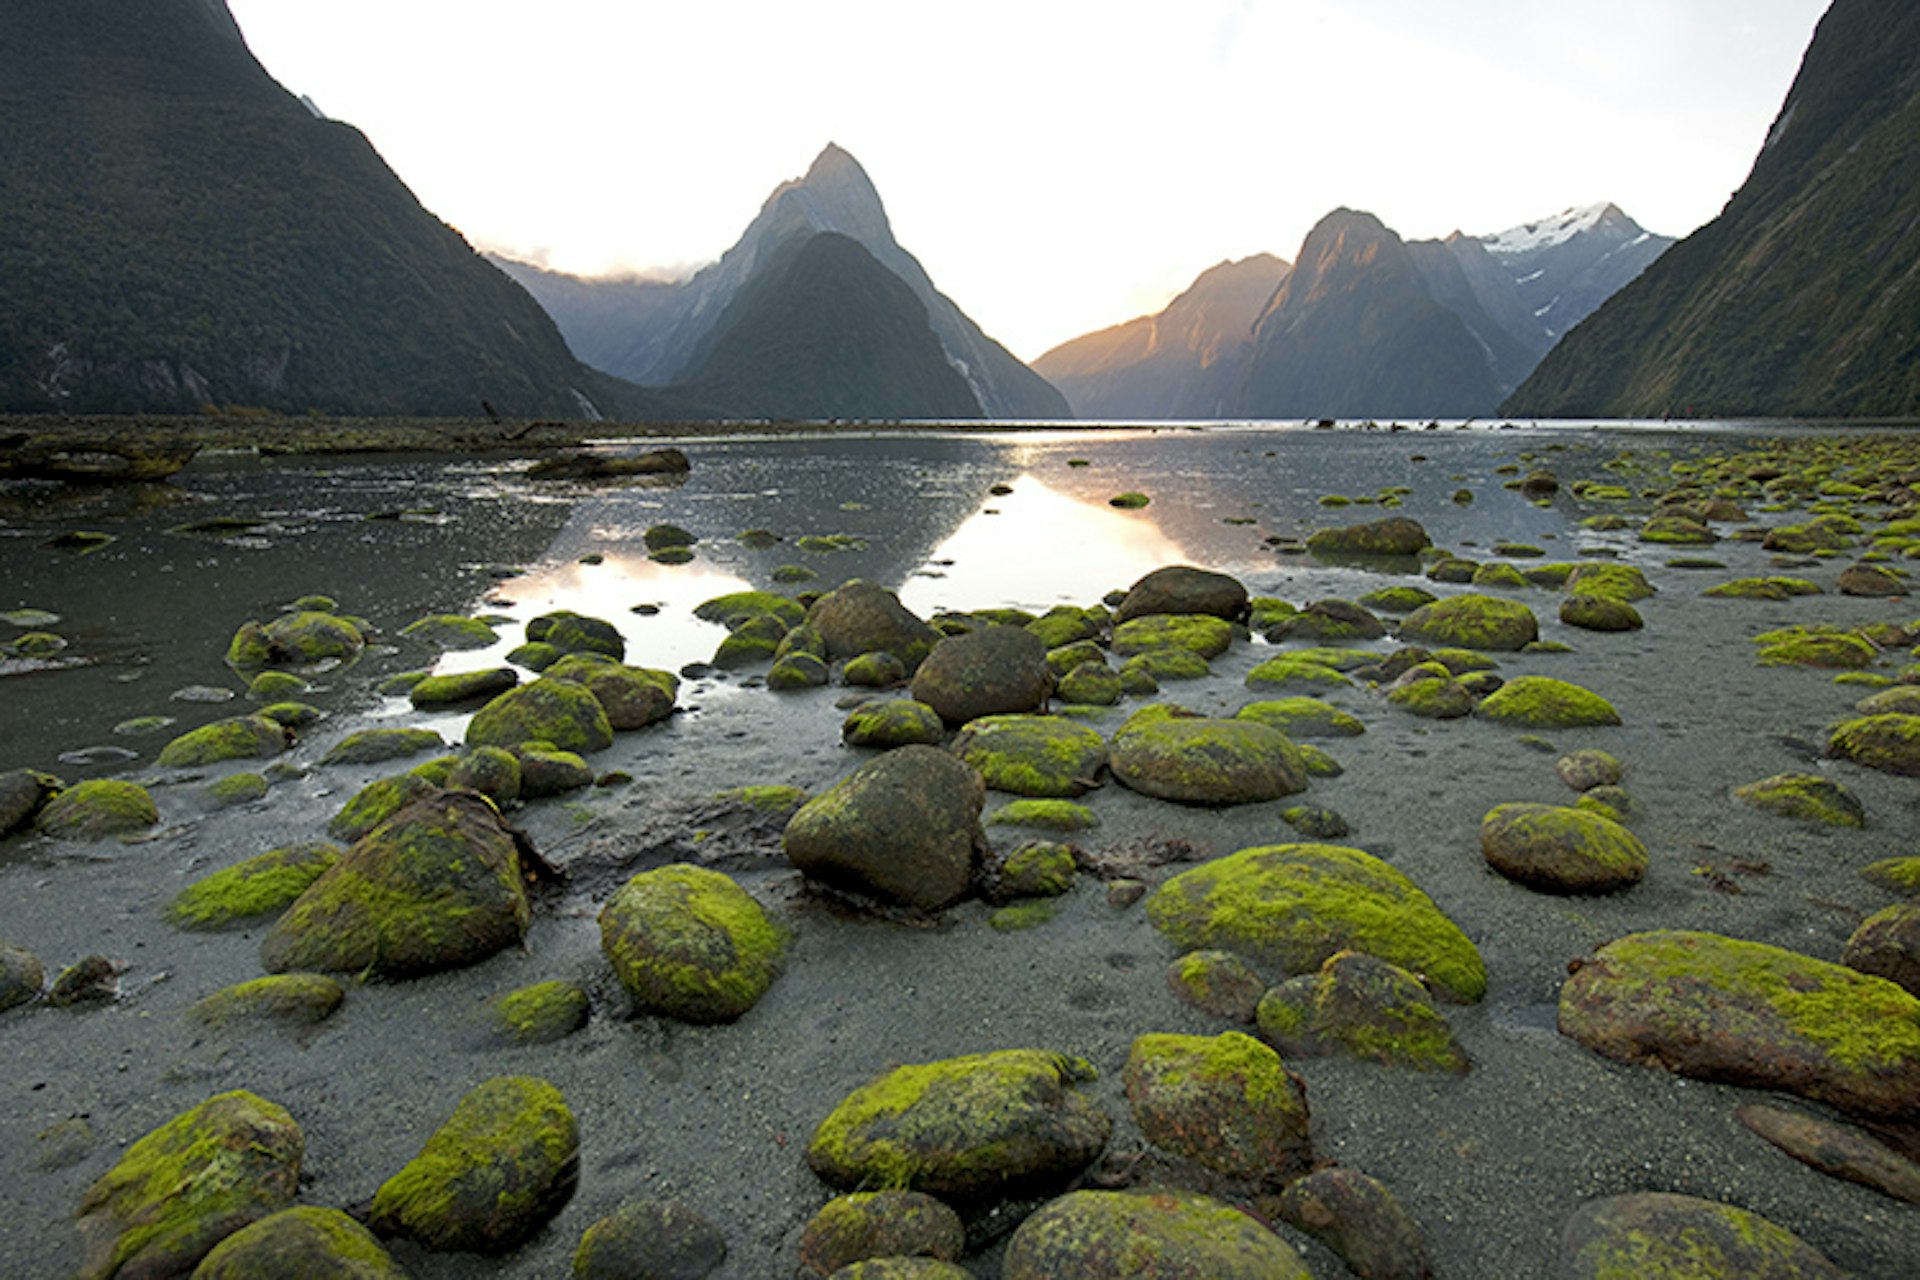 Moss covererd rocks in inlet off Milford Sound with Mitre Peak in background.